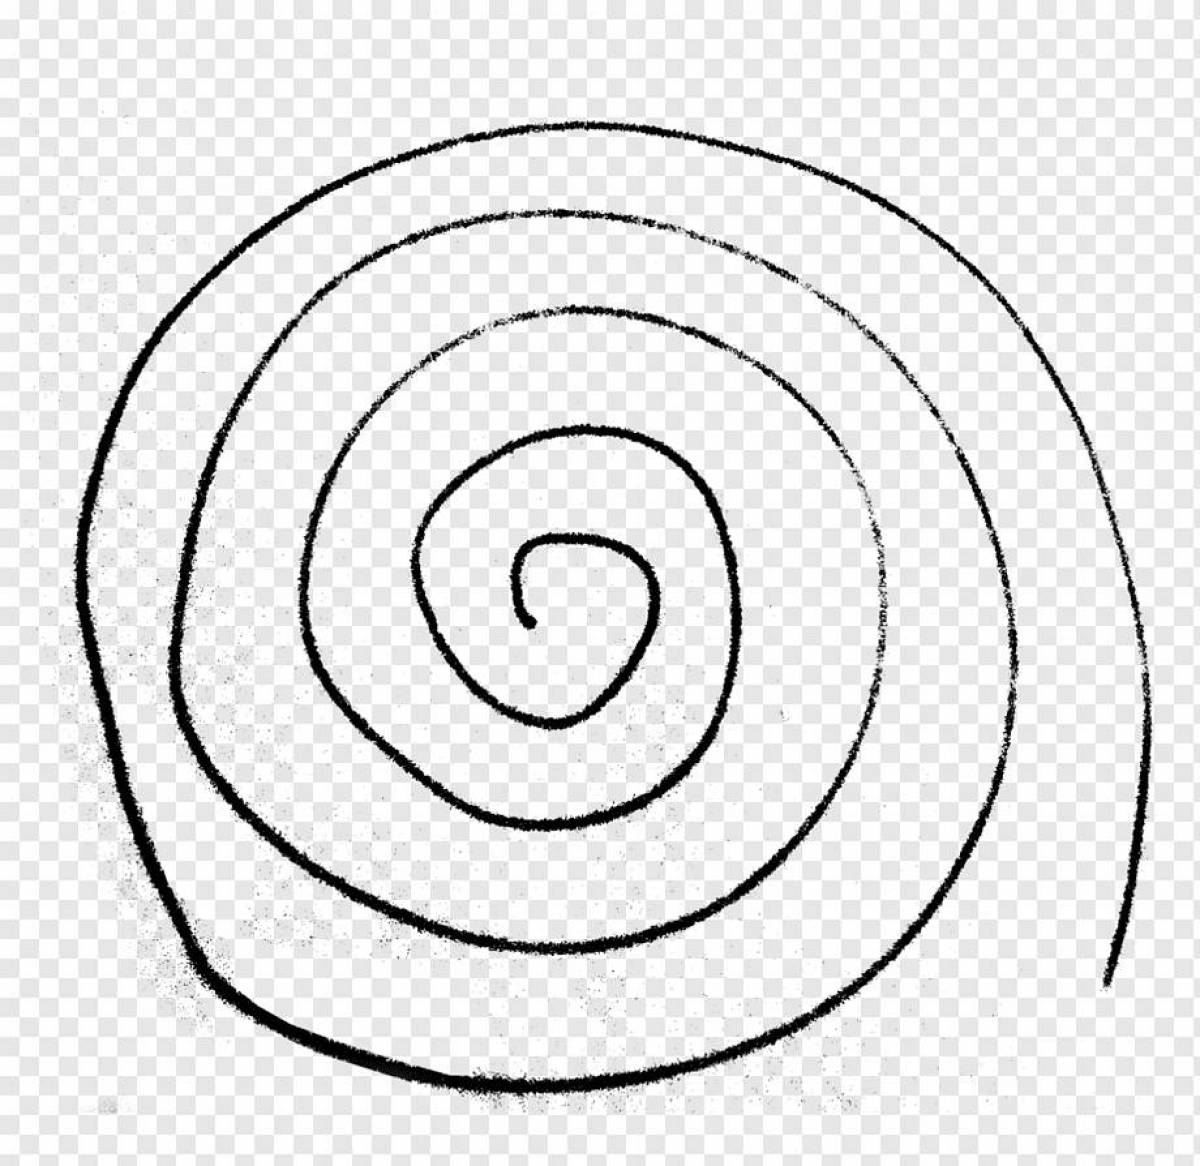 Attractive coloring in a circle in a spiral